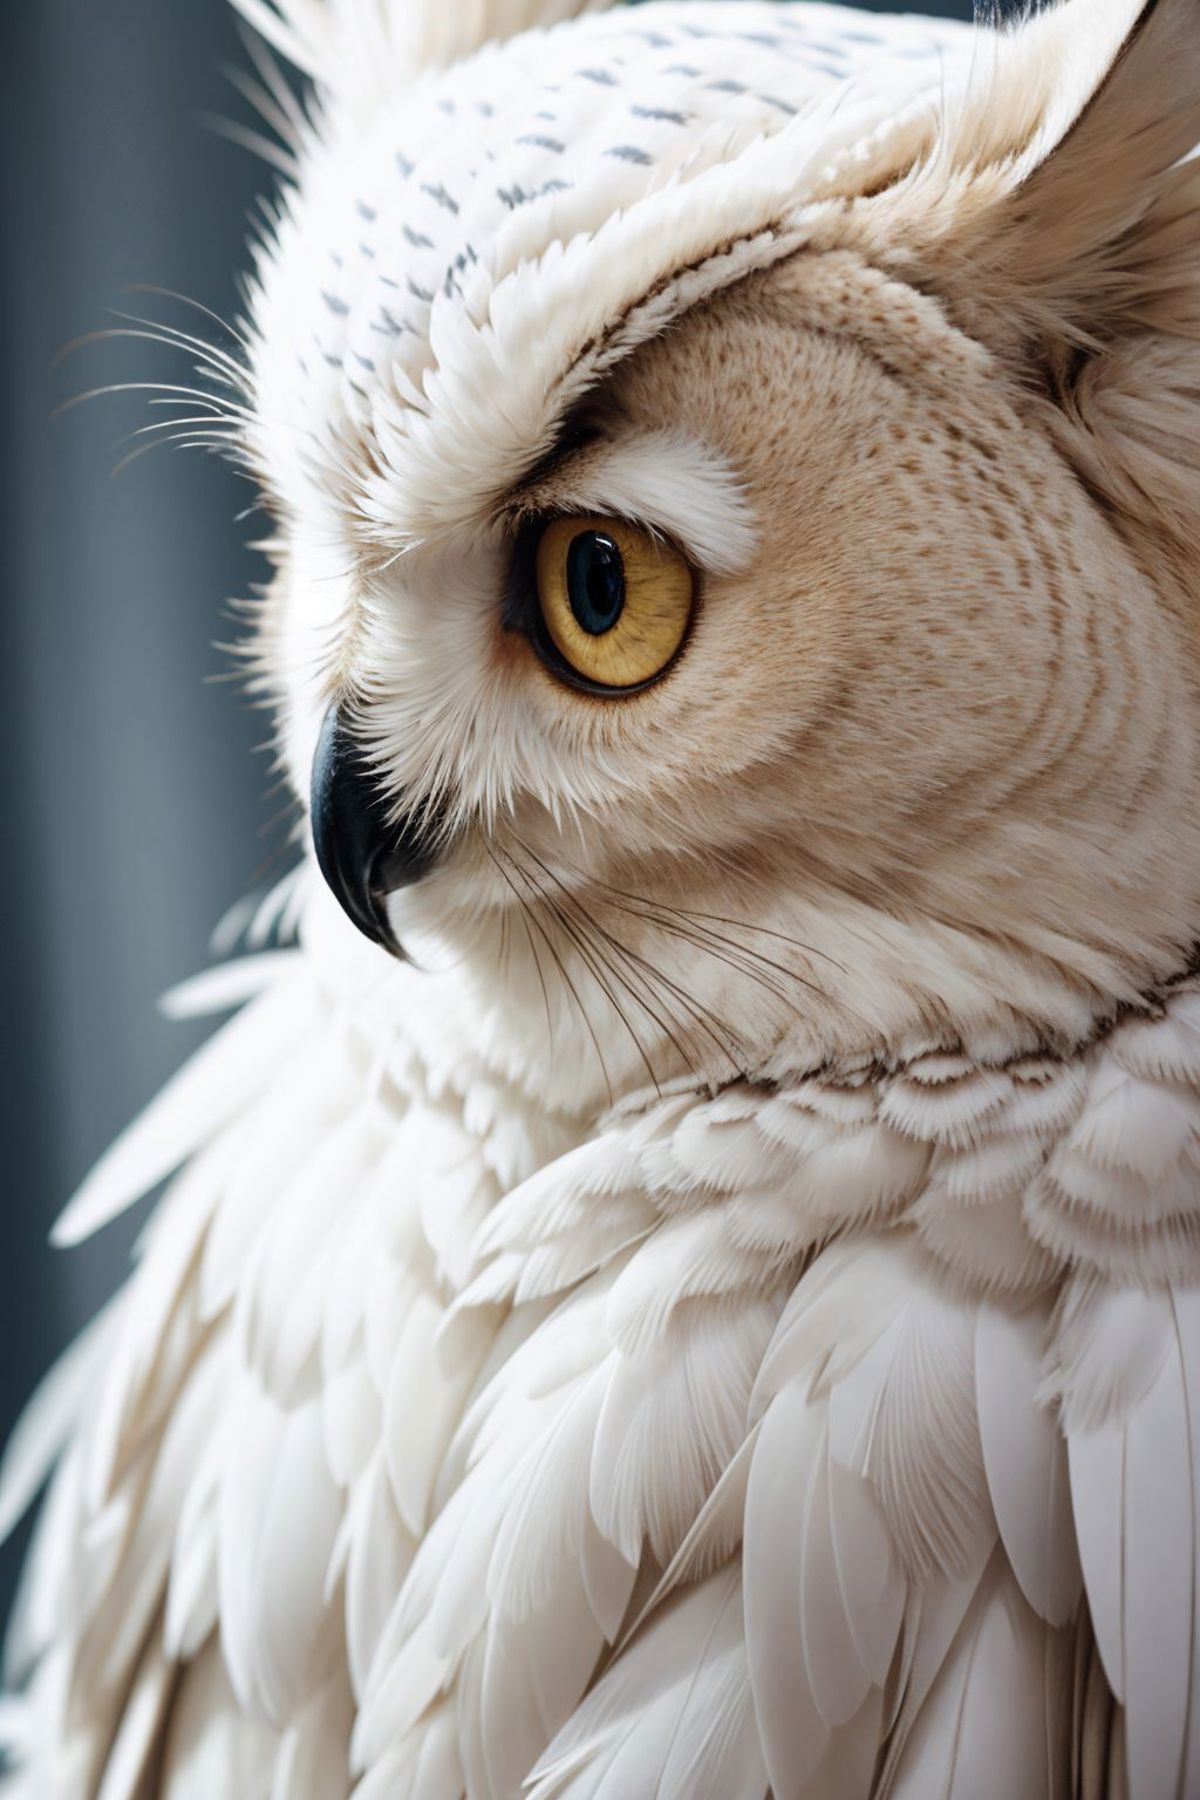 A close-up of a white owl with yellow eyes.